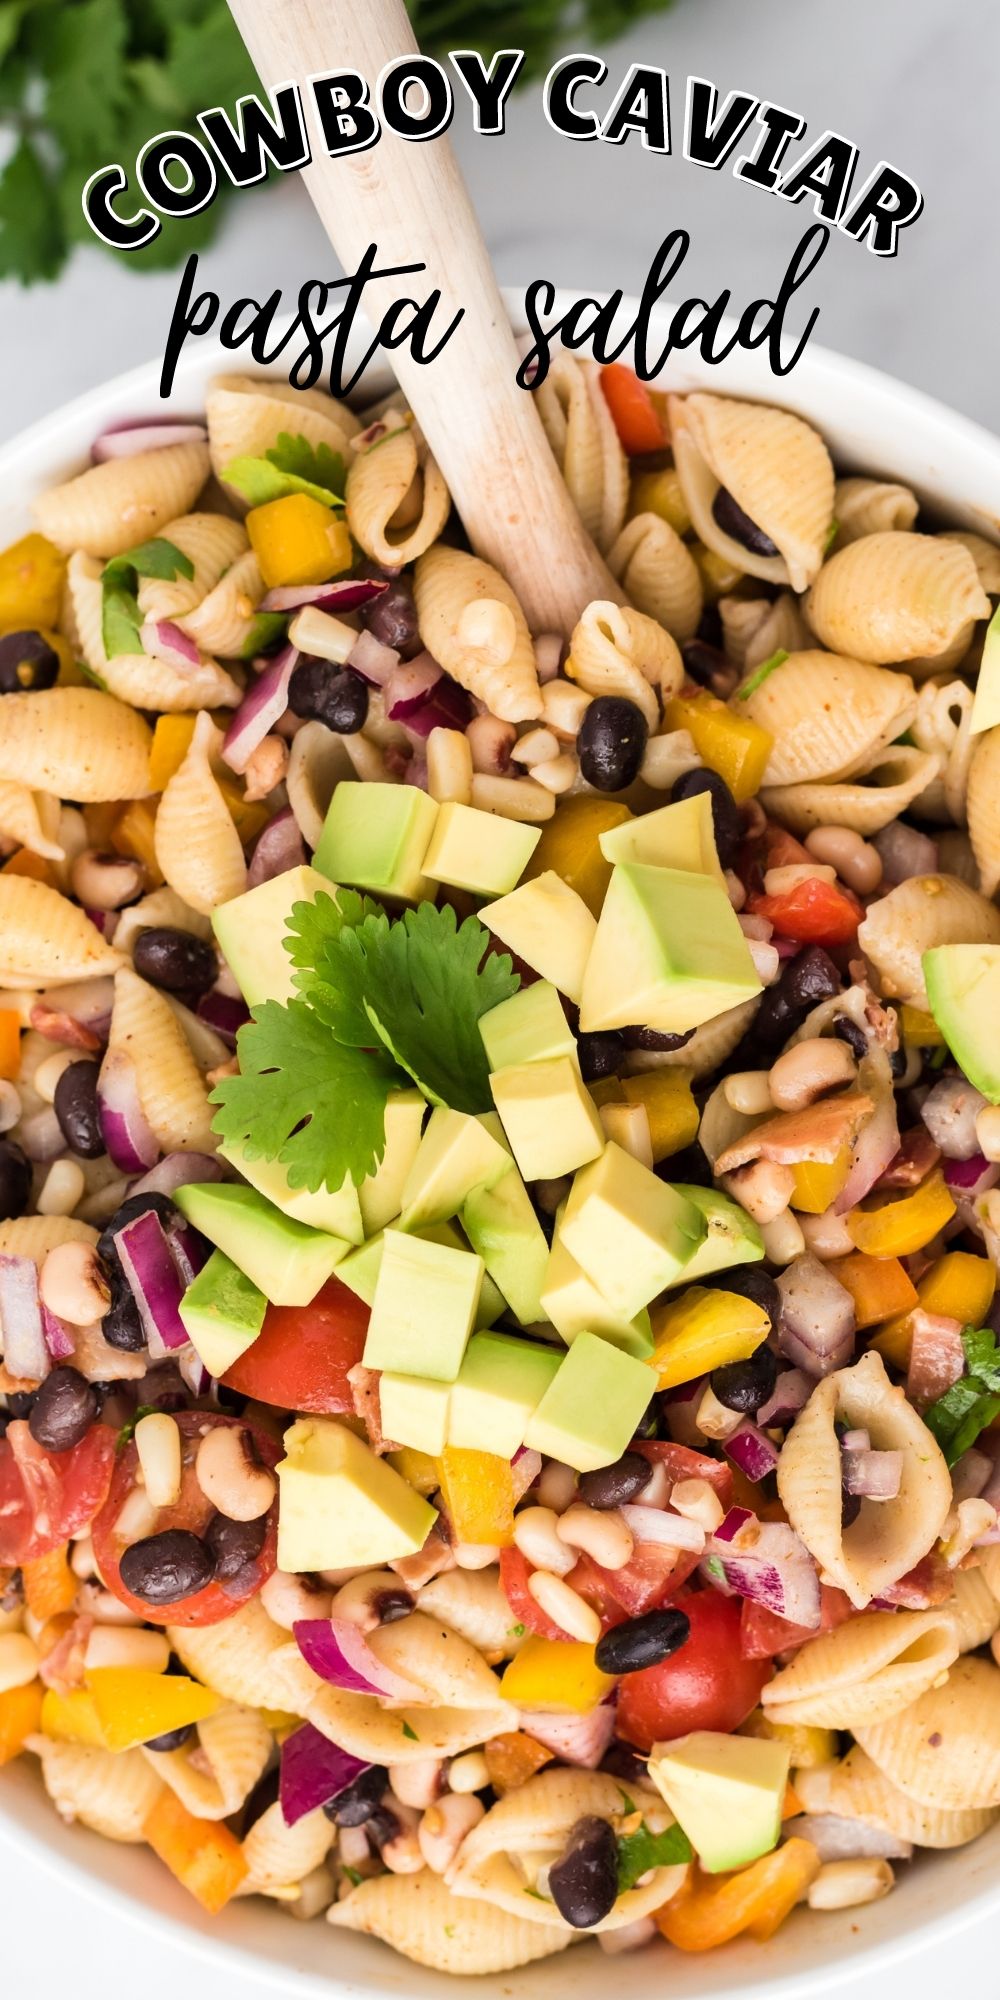 Elevate your pasta salad game with our Cowboy Caviar Pasta Salad recipe. This dish is packed with veggies, bacon with a light tangy dressing. via @familyfresh